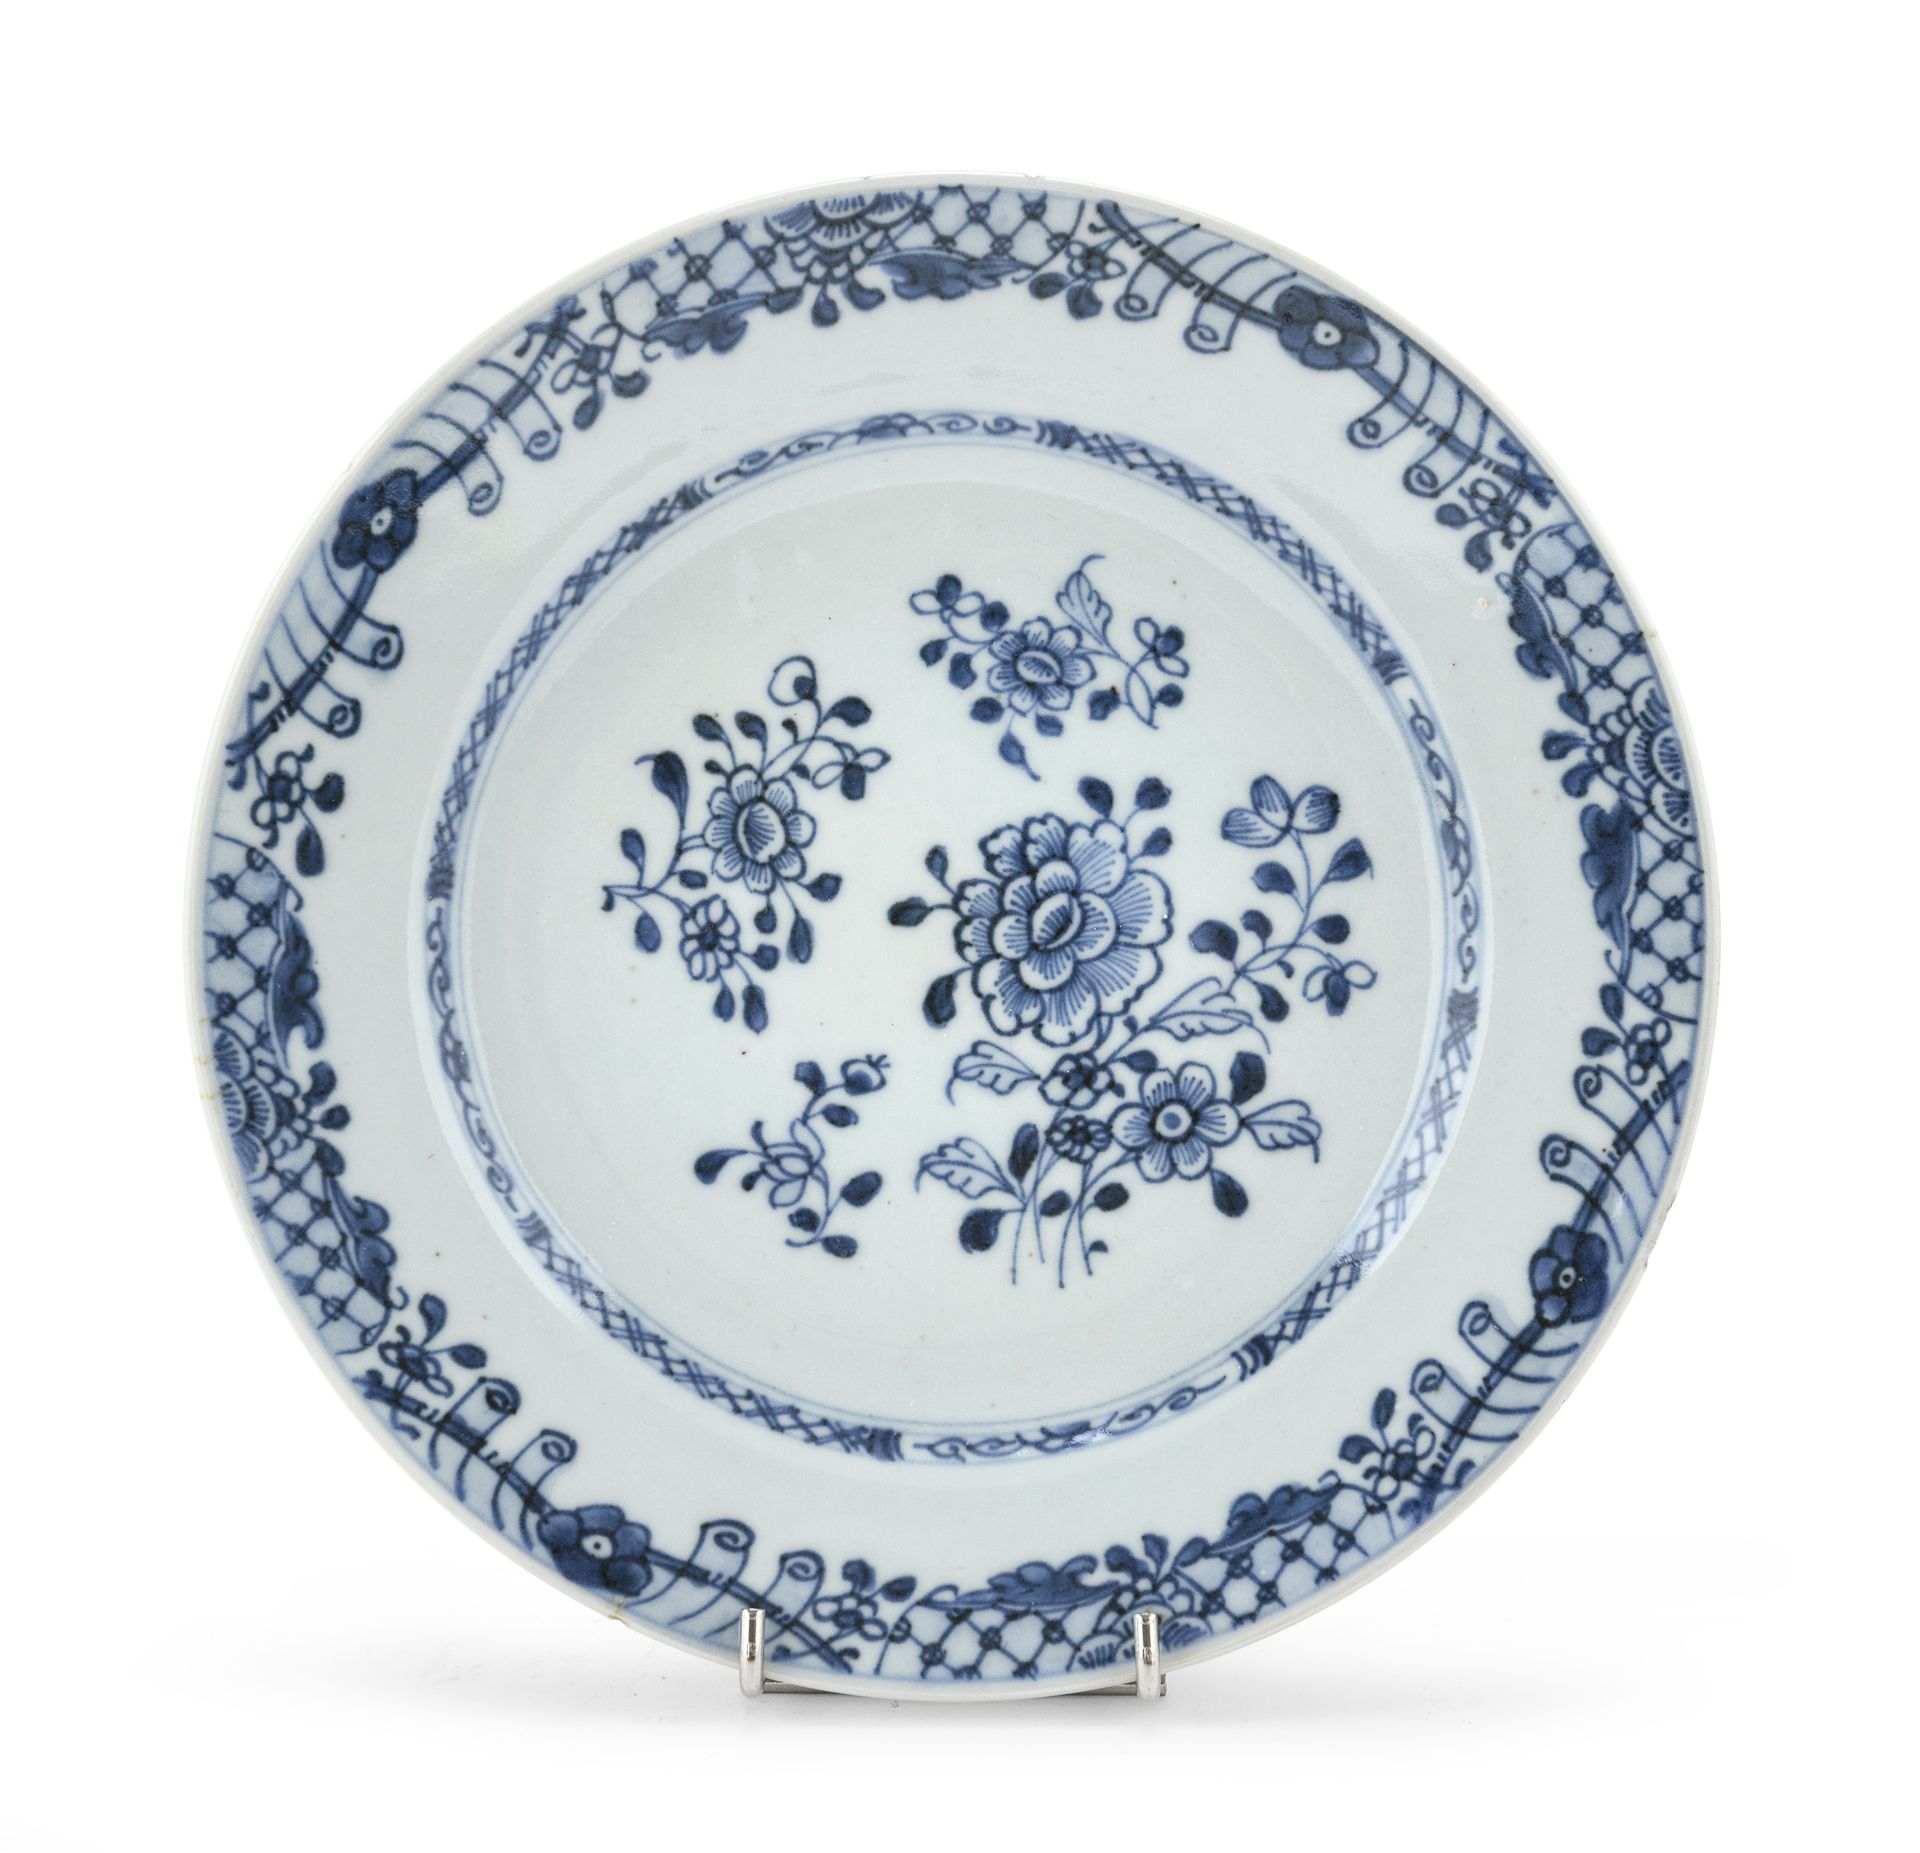 BLUE AND WHITE PORCELAIN DISH CHINA LATE 18TH CENTURY